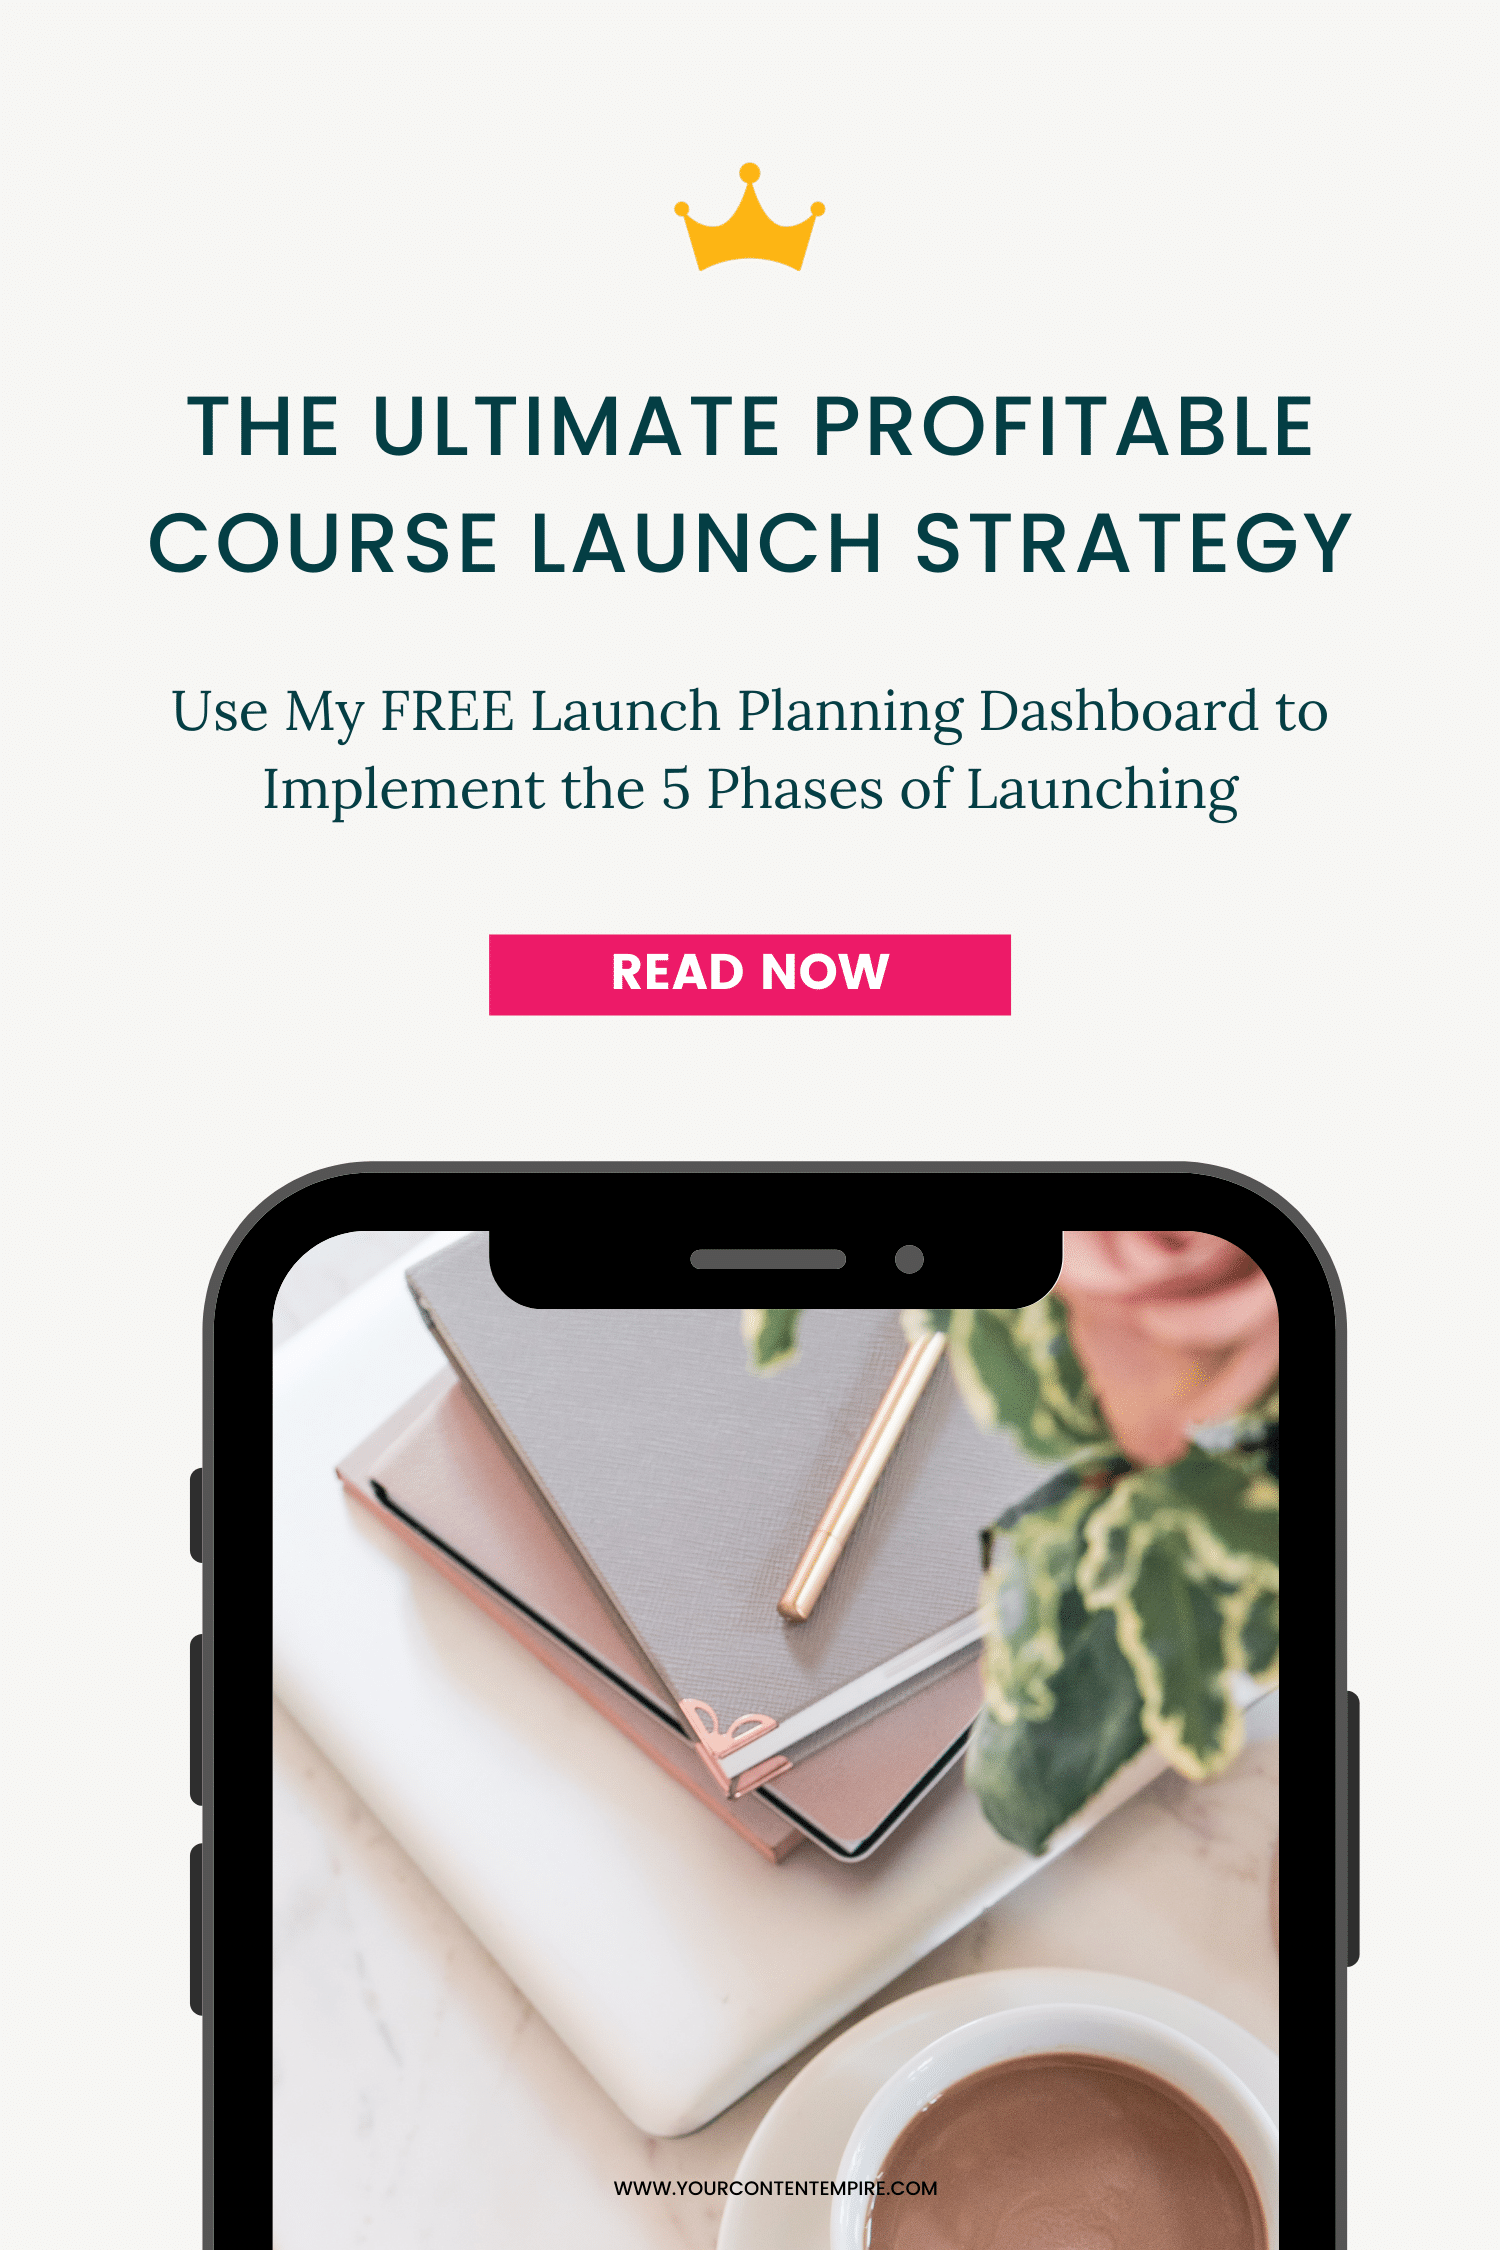 The Ultimate Profitable Course Launch Strategy